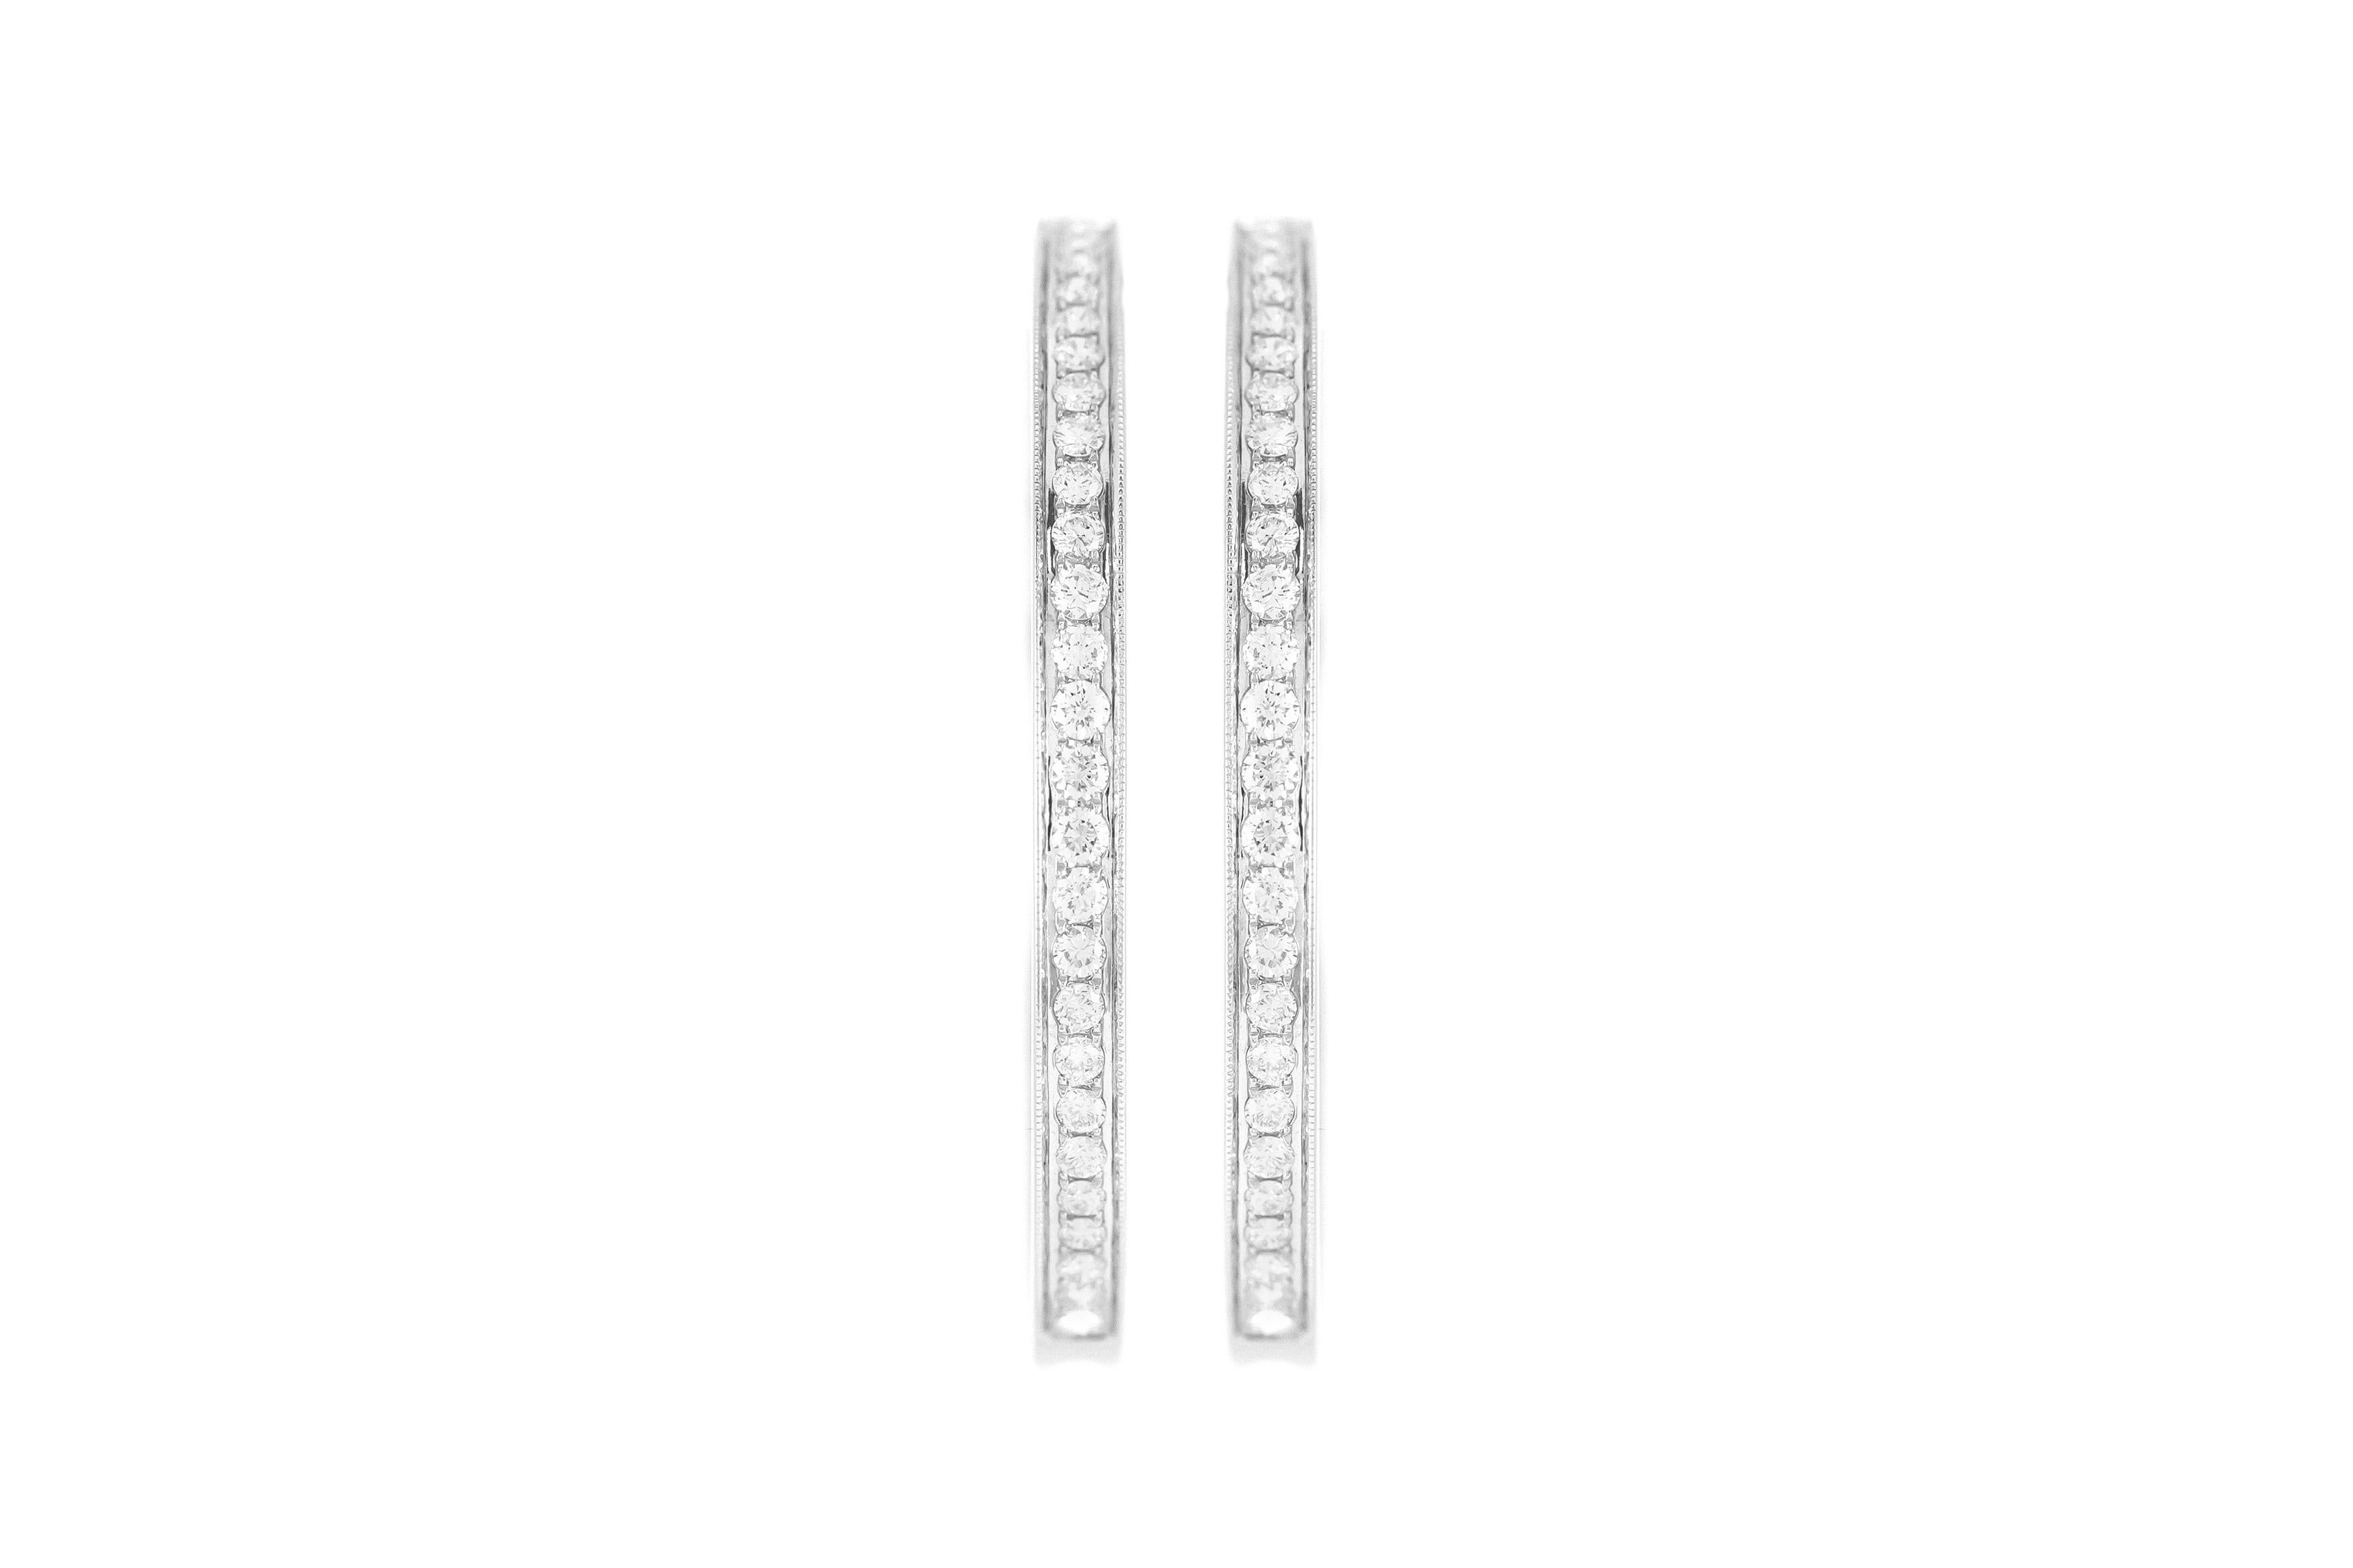 The earrings is finely crafted in 14k white gold with diamonds all around weighing approximately total of 4.00 carat.